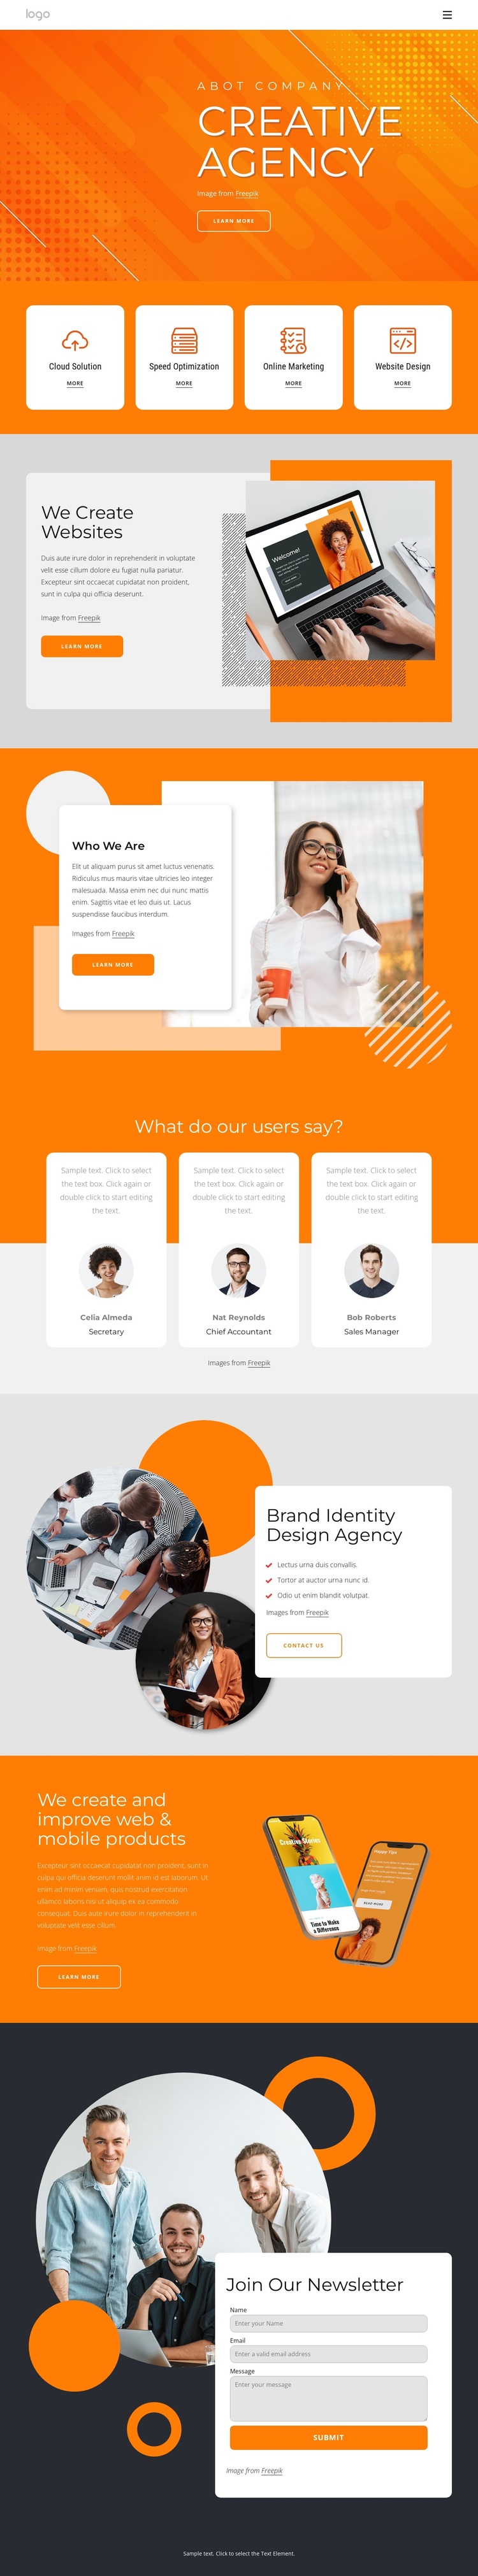 The creative agency for your next big thing Template